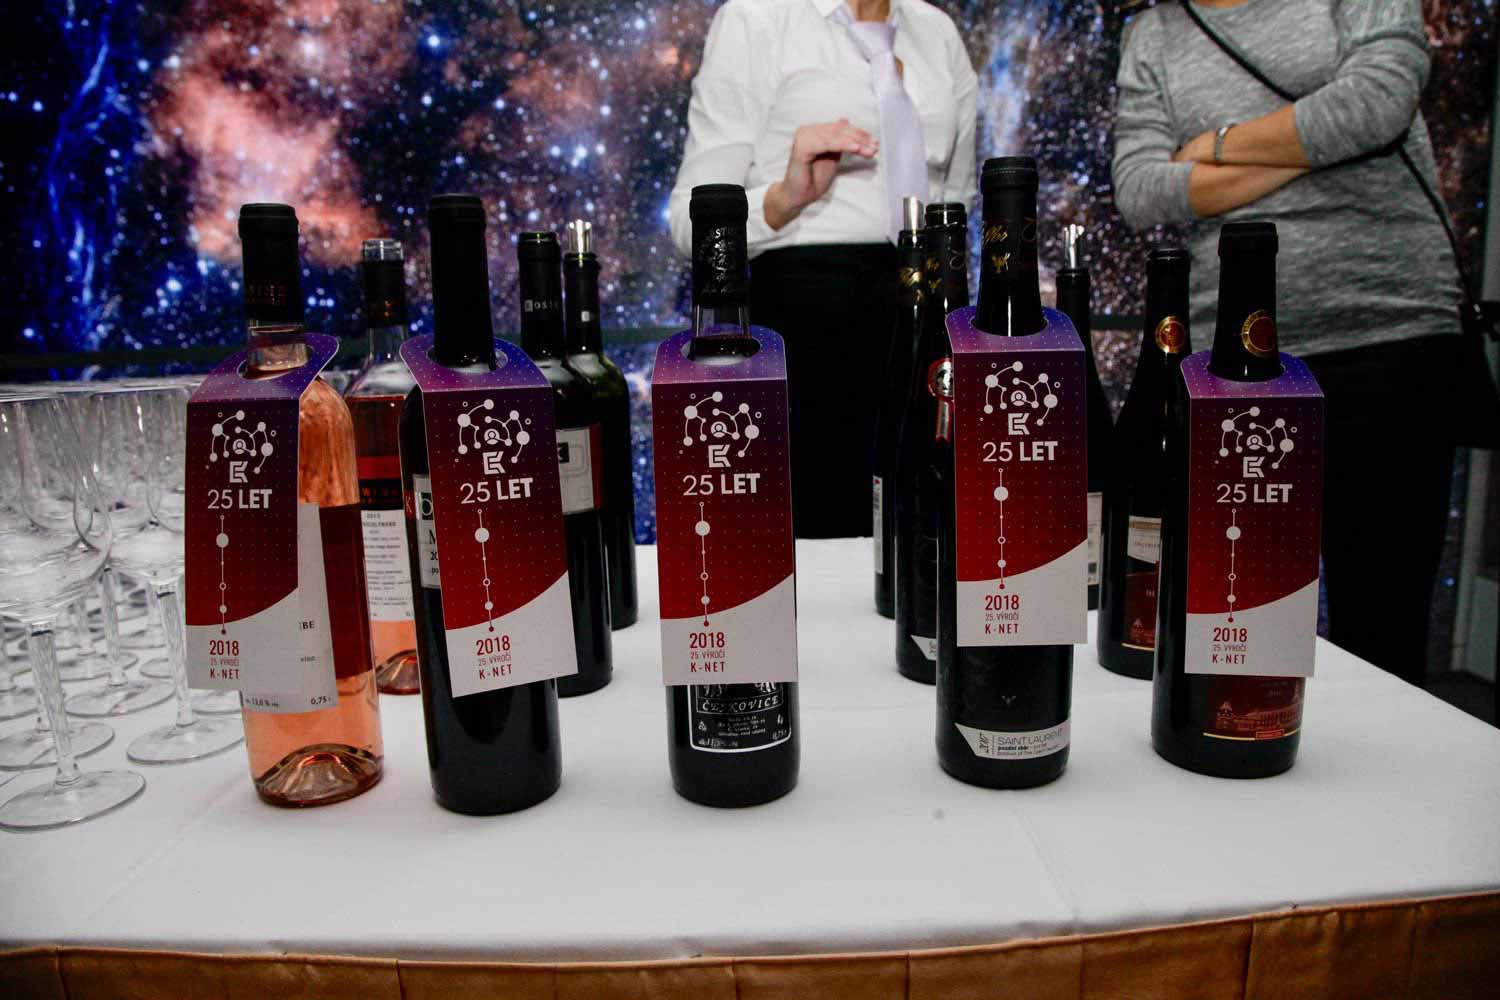 Bootles of wine with K-net logo in Planetarium of Brno